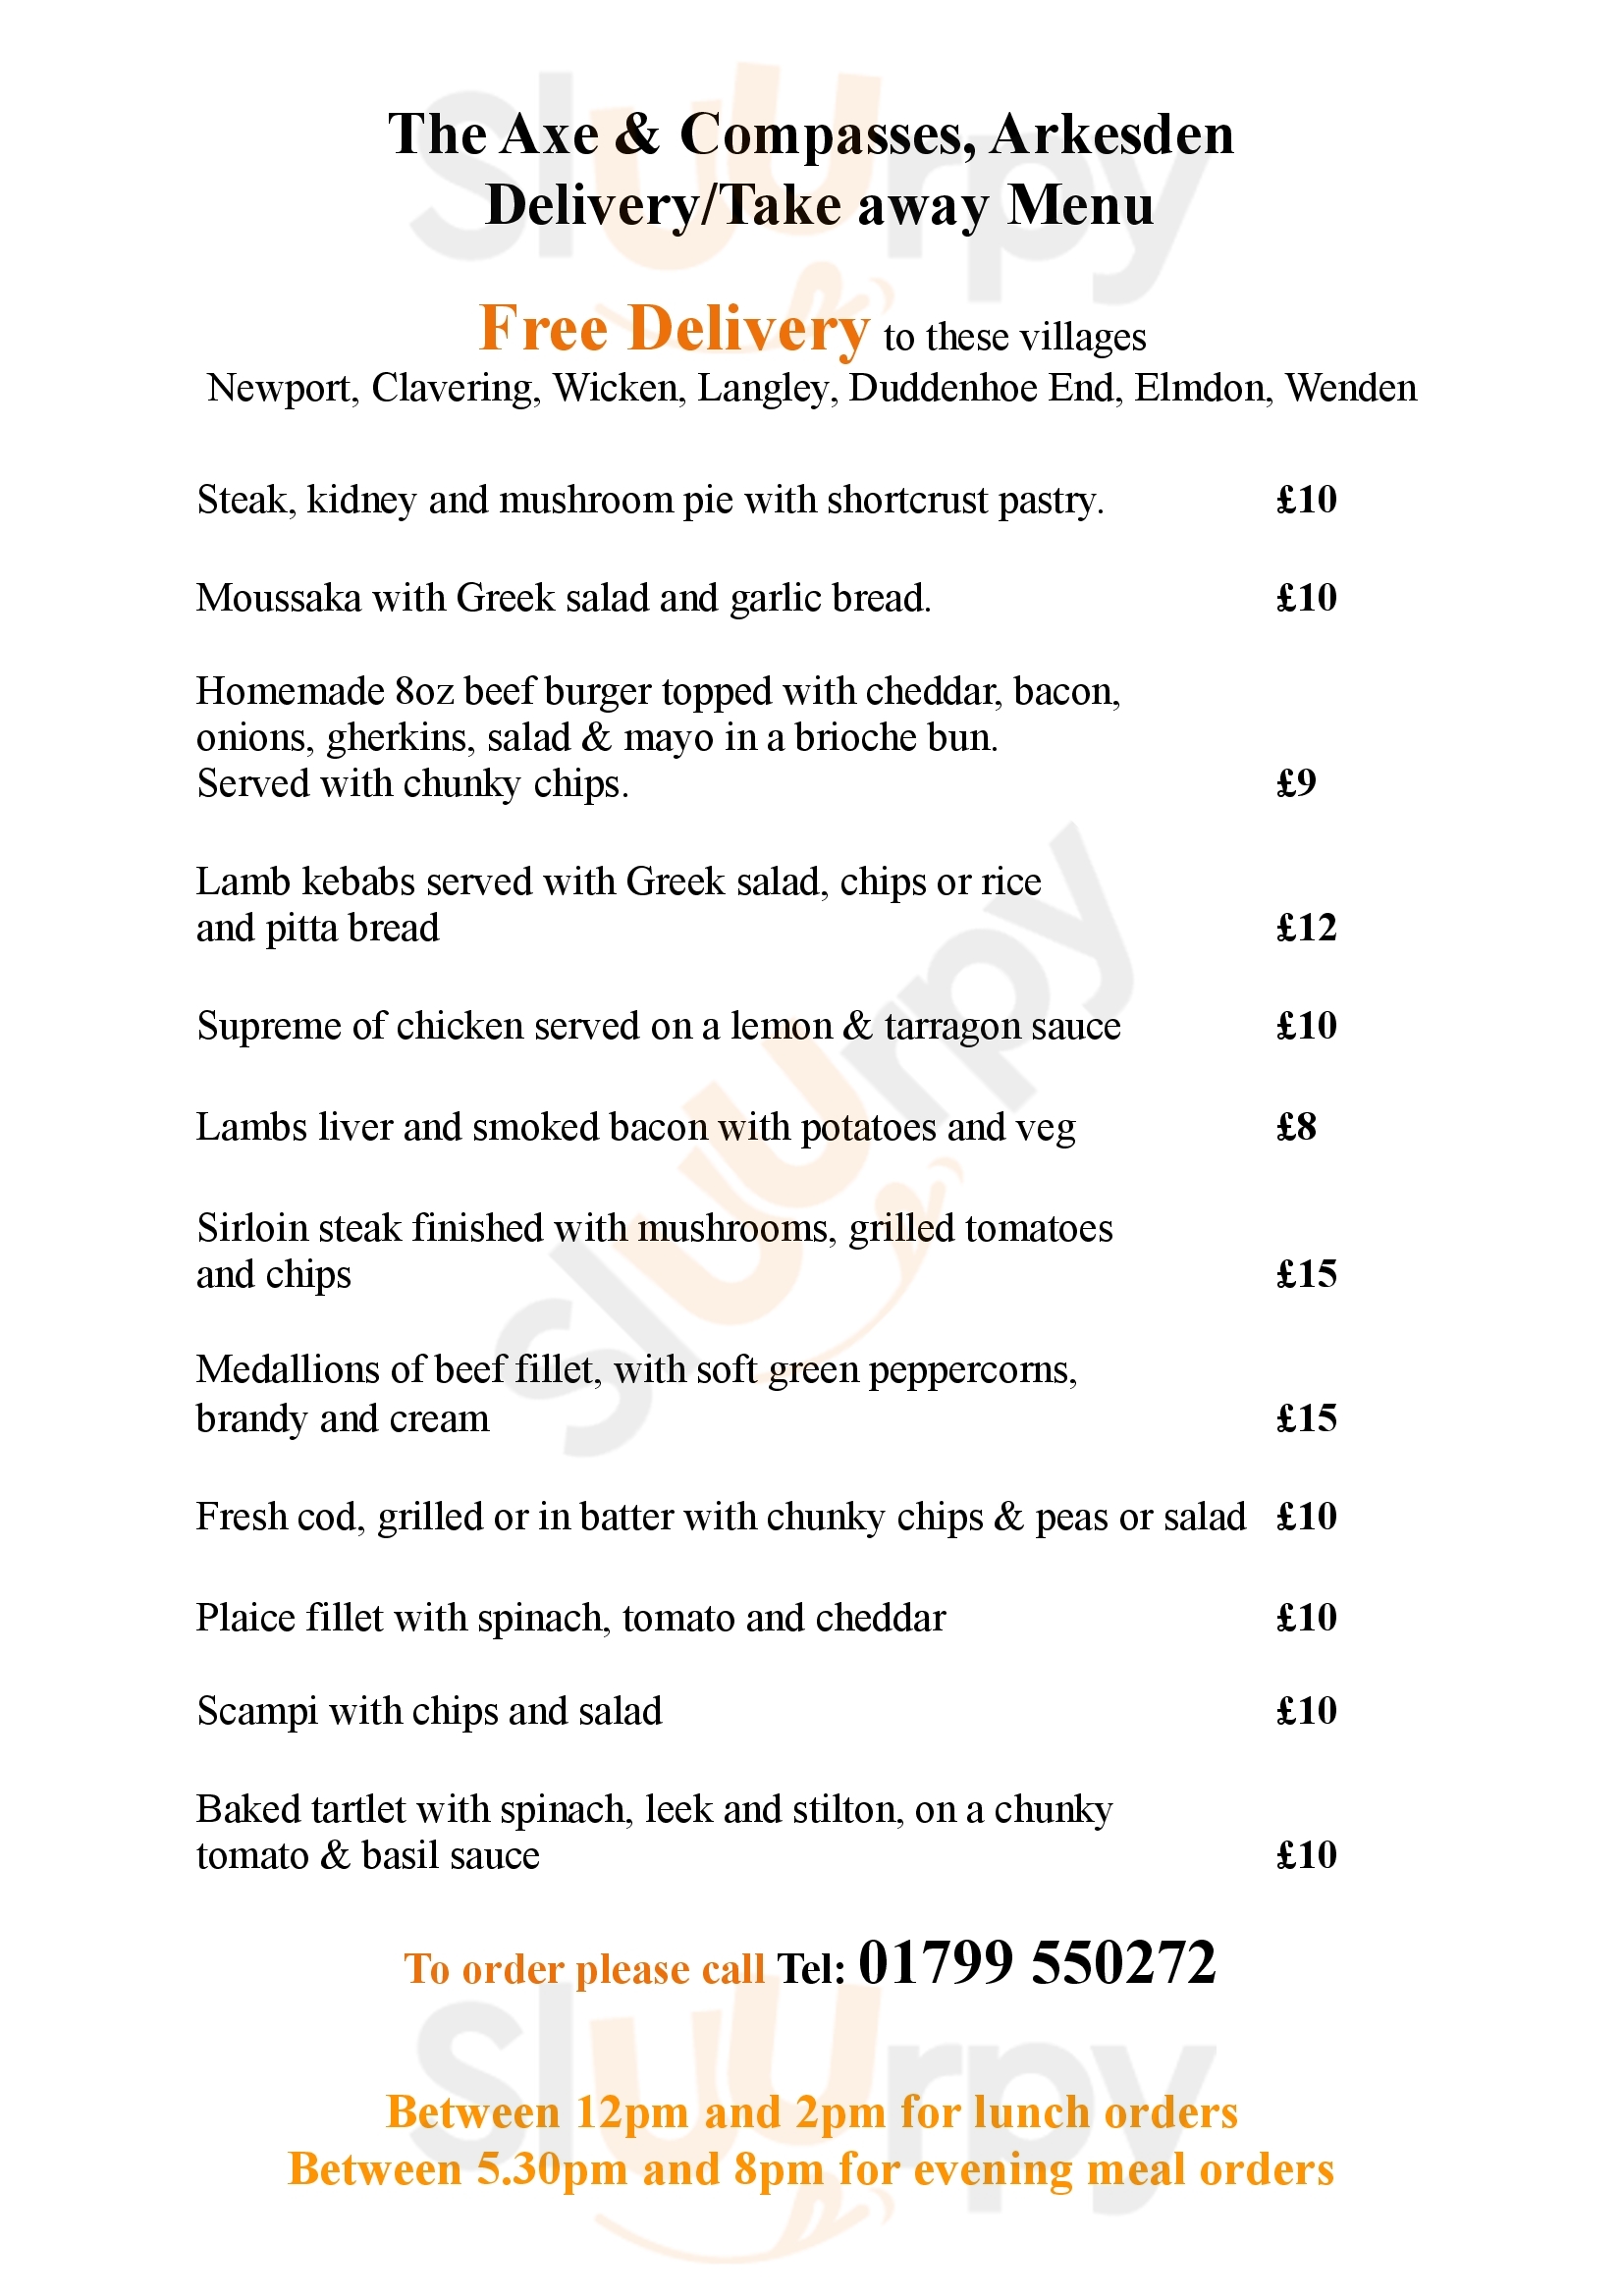 The Axe And Compasses Arkesden Menu - 1